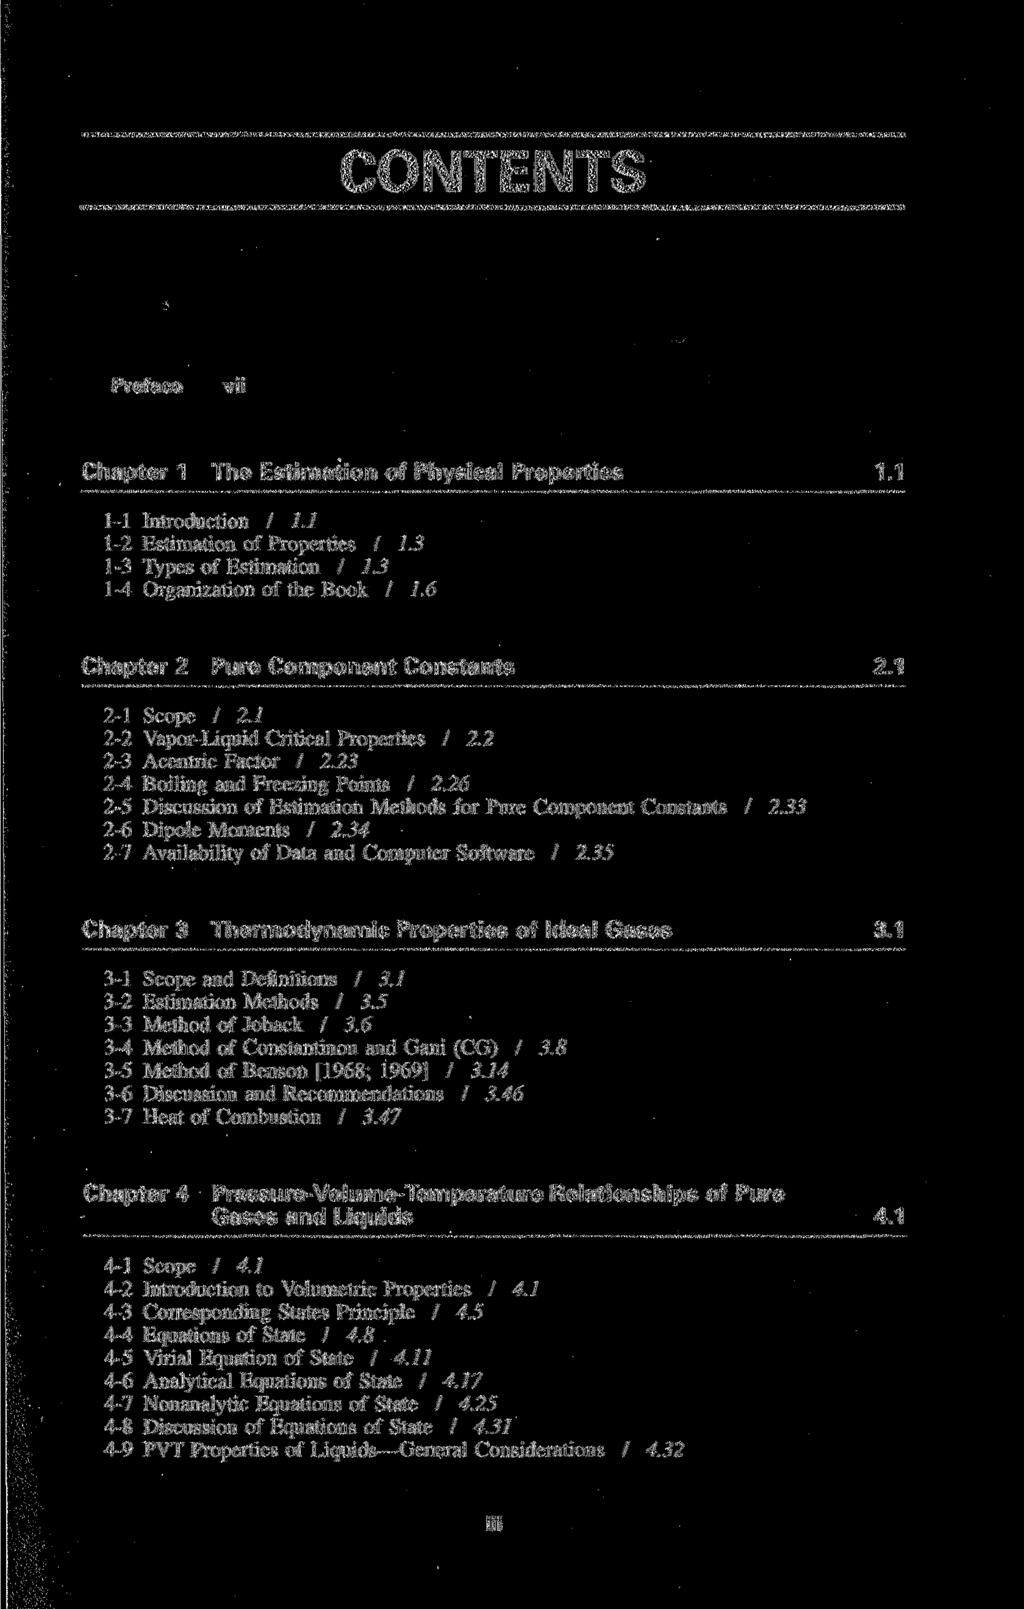 CONTENTS Preface vii Chapter 1 The Estimation of Physical Properties 1.1 1-1 Introduction / 1.1 1-2 Estimation of Properties / 1.3 1-3 Types of Estimation / 1.3 1-4 Organization of the Book / 1.